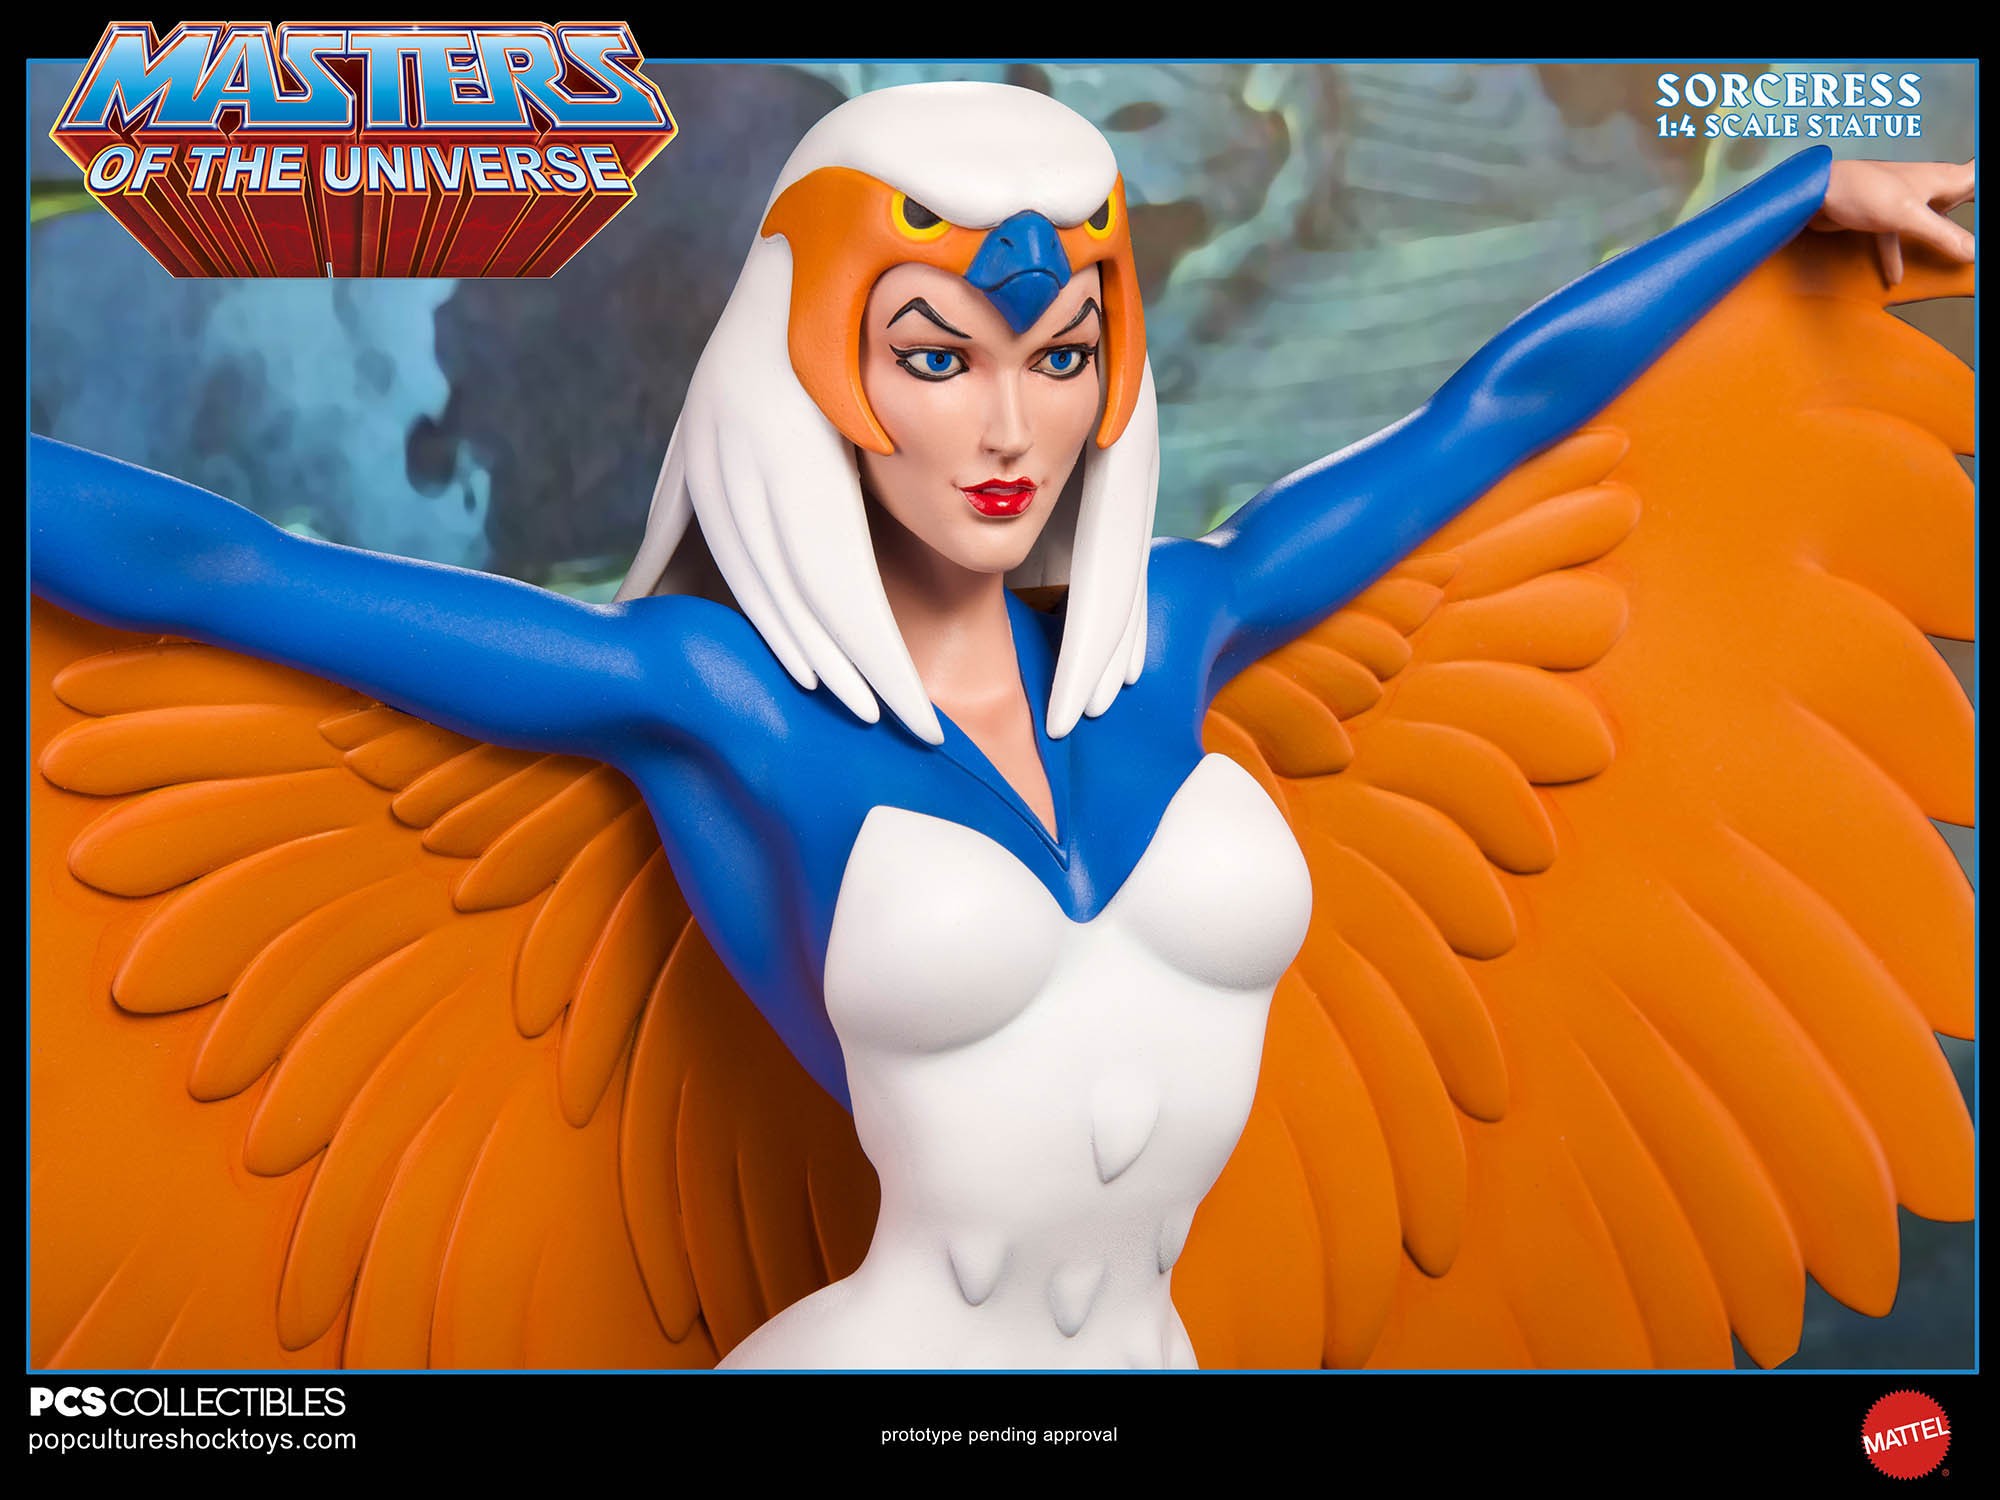 masters of the universe sorceress